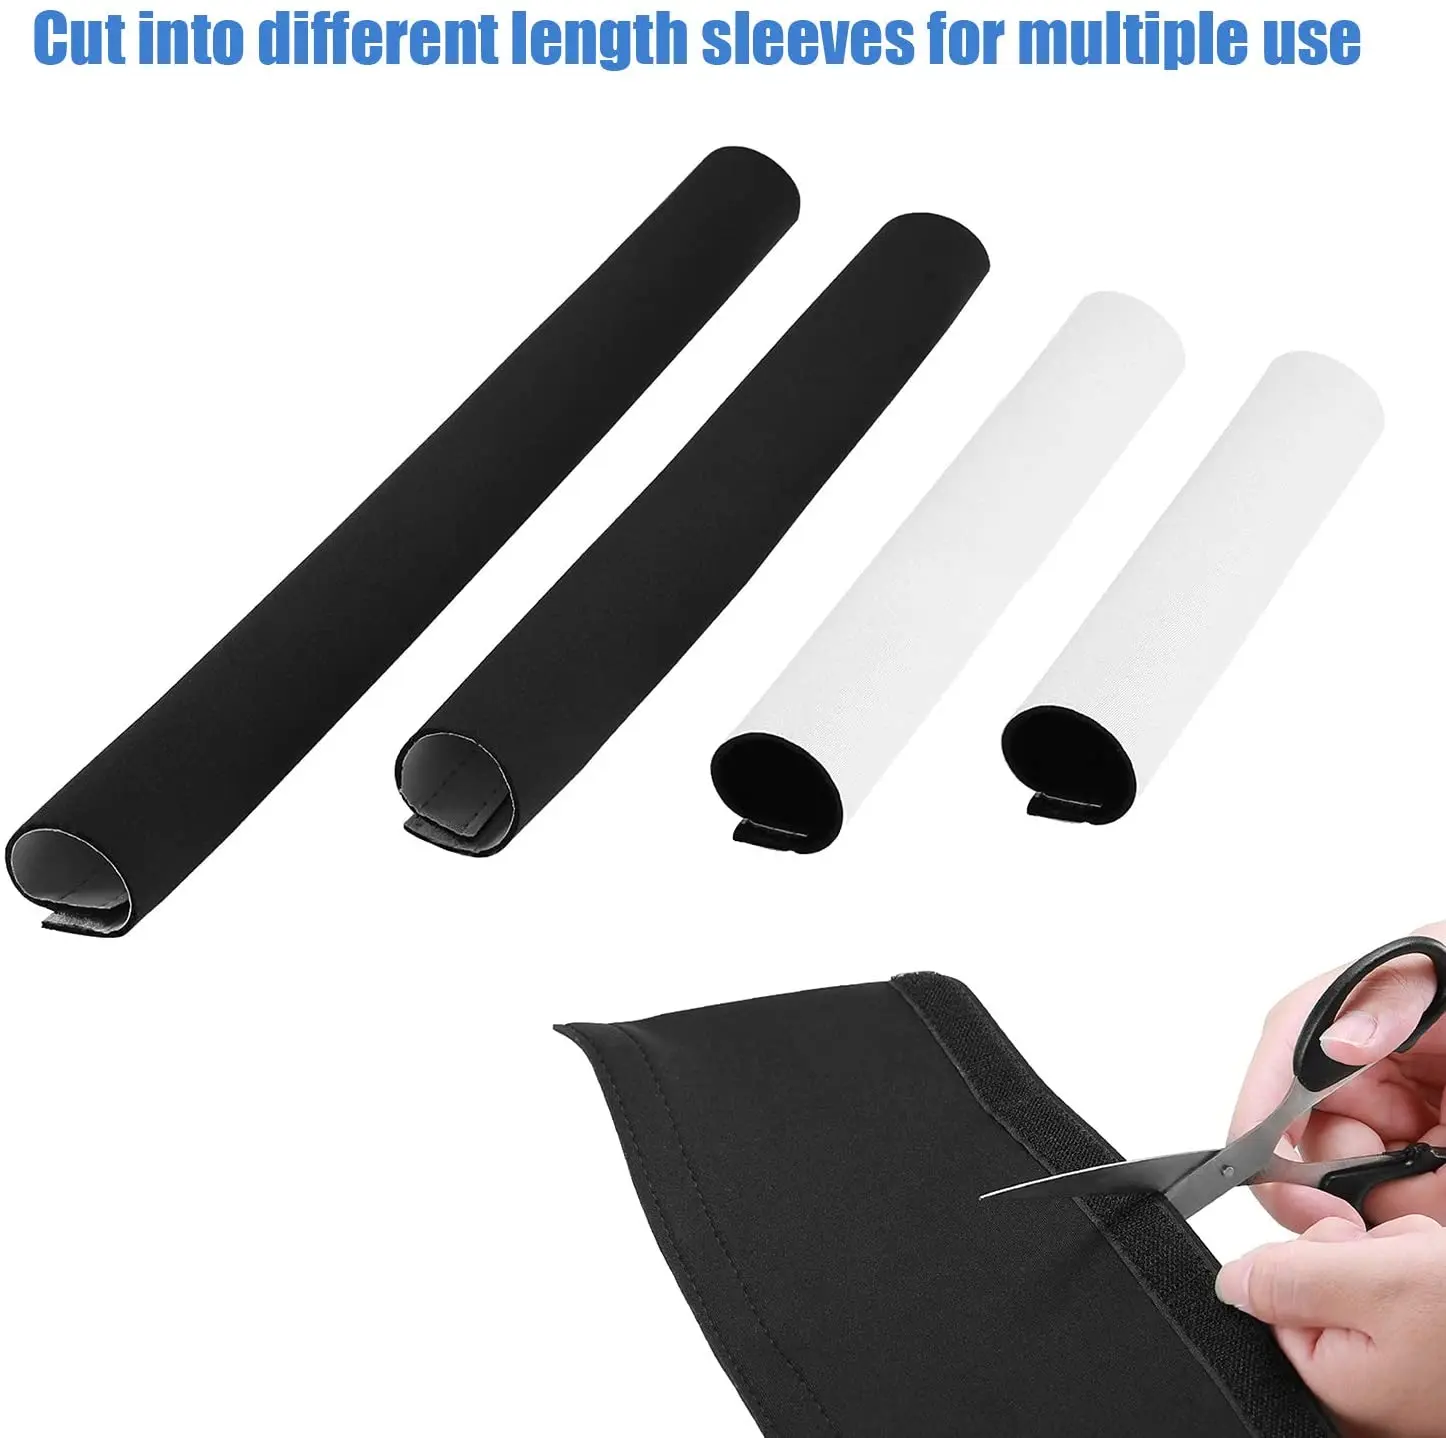 Reversible Black & White Cable Management Sleeves Neoprene Cable Organizer  Wrap Flexible Cord Cover Wire Hider - China Cable Management Sleeve,  Neoprene Cable Management Sleeve